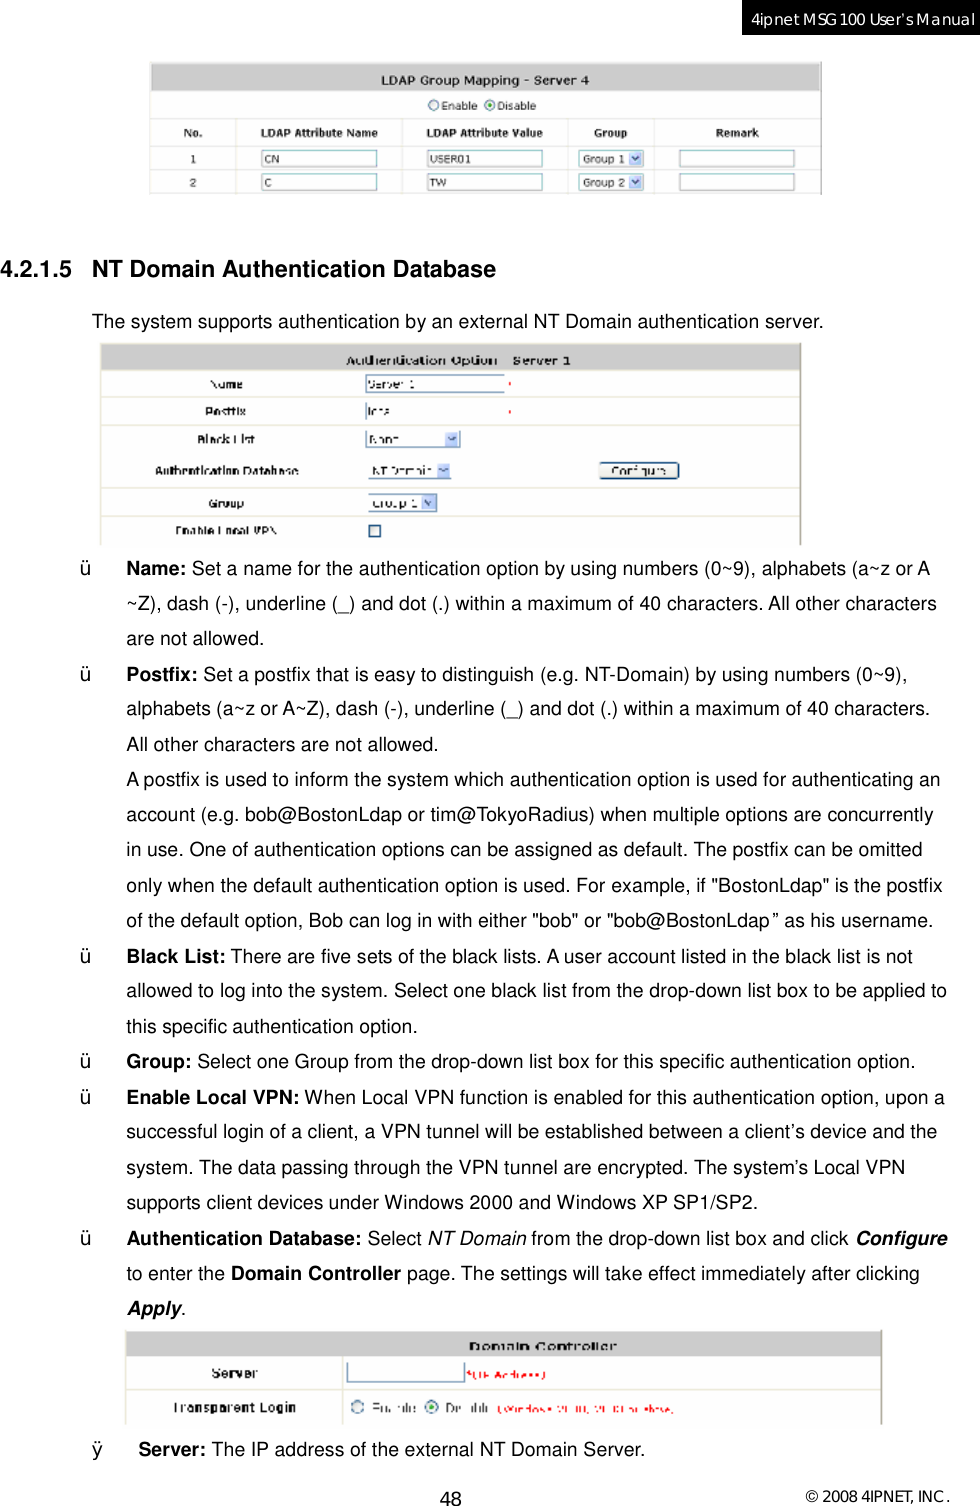  © 2008 4IPNET, INC. 48 4ipnet MSG100 User’s Manual    4.2.1.5 NT Domain Authentication Database The system supports authentication by an external NT Domain authentication server.   Ÿ Name: Set a name for the authentication option by using numbers (0~9), alphabets (a~z or A ~Z), dash (-), underline (_) and dot (.) within a maximum of 40 characters. All other characters are not allowed. Ÿ Postfix: Set a postfix that is easy to distinguish (e.g. NT-Domain) by using numbers (0~9), alphabets (a~z or A~Z), dash (-), underline (_) and dot (.) within a maximum of 40 characters. All other characters are not allowed.  A postfix is used to inform the system which authentication option is used for authenticating an account (e.g. bob@BostonLdap or tim@TokyoRadius) when multiple options are concurrently in use. One of authentication options can be assigned as default. The postfix can be omitted only when the default authentication option is used. For example, if &quot;BostonLdap&quot; is the postfix of the default option, Bob can log in with either &quot;bob&quot; or &quot;bob@BostonLdap” as his username.  Ÿ Black List: There are five sets of the black lists. A user account listed in the black list is not allowed to log into the system. Select one black list from the drop-down list box to be applied to this specific authentication option. Ÿ Group: Select one Group from the drop-down list box for this specific authentication option. Ÿ Enable Local VPN: When Local VPN function is enabled for this authentication option, upon a successful login of a client, a VPN tunnel will be established between a client’s device and the system. The data passing through the VPN tunnel are encrypted. The system’s Local VPN supports client devices under Windows 2000 and Windows XP SP1/SP2. Ÿ Authentication Database: Select NT Domain from the drop-down list box and click Configure to enter the Domain Controller page. The settings will take effect immediately after clicking Apply.  Ø Server: The IP address of the external NT Domain Server. 